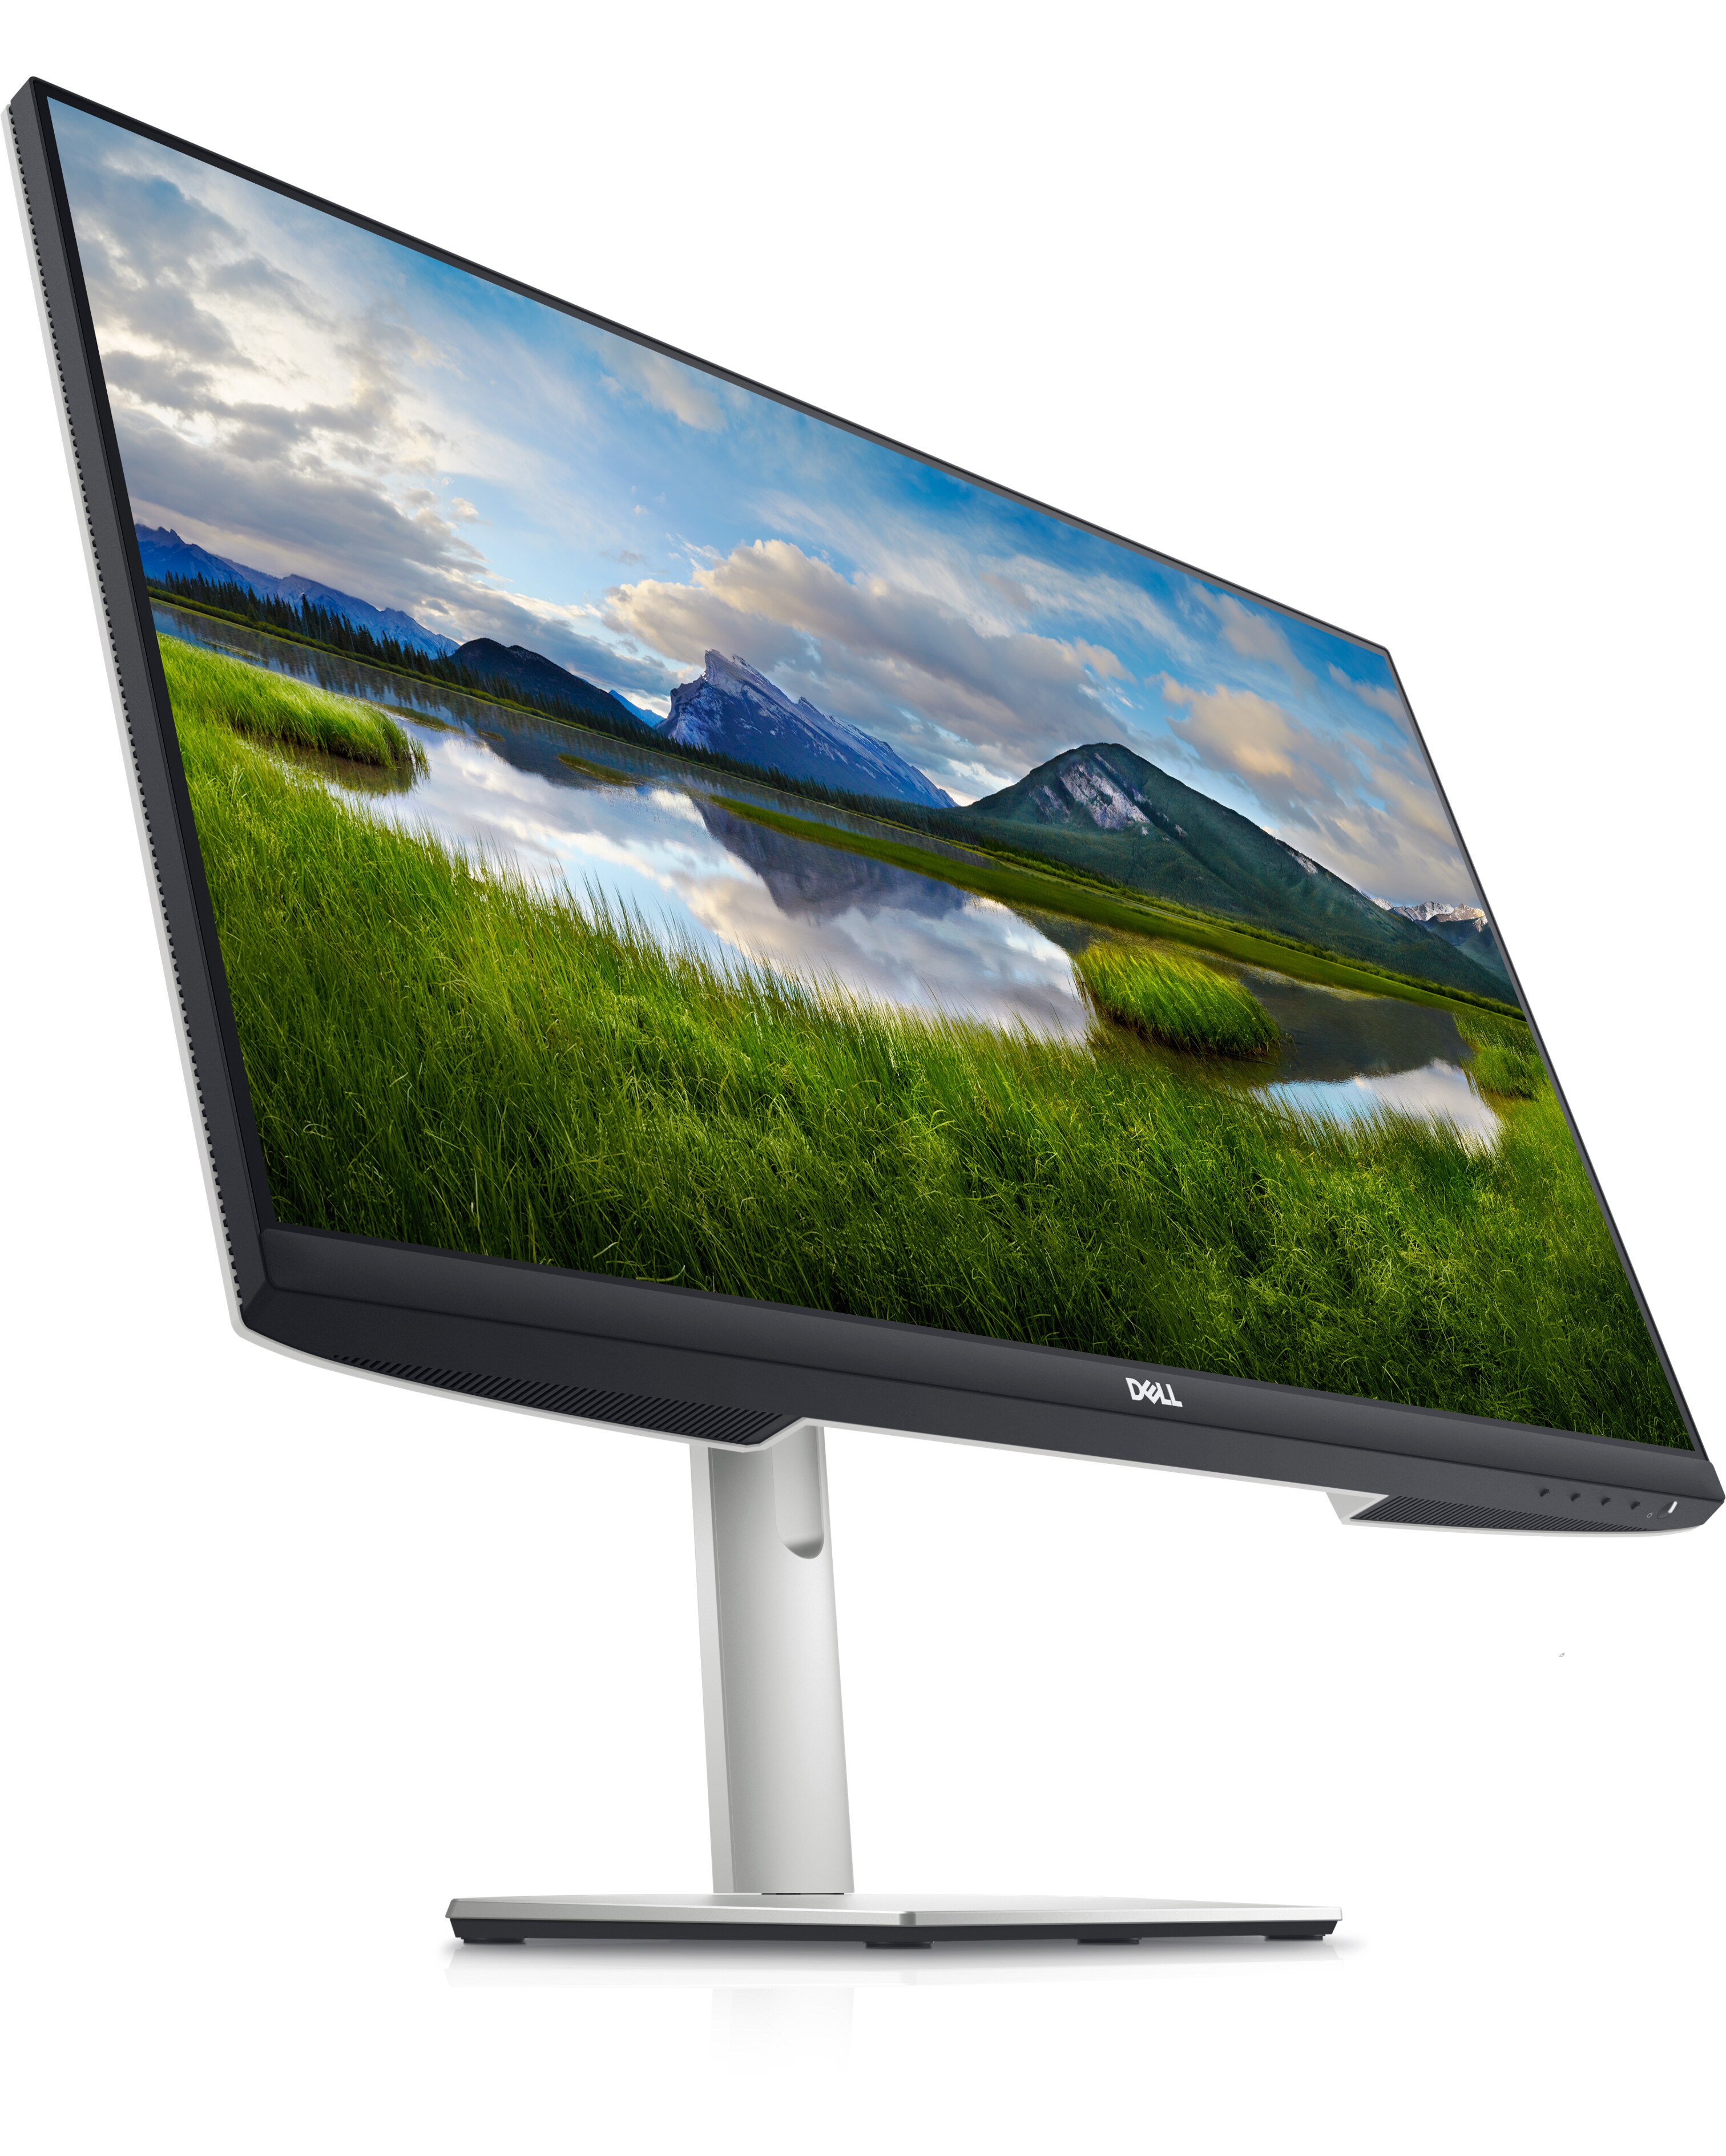 Picture of a Dell 24 Monitor S2421HS.